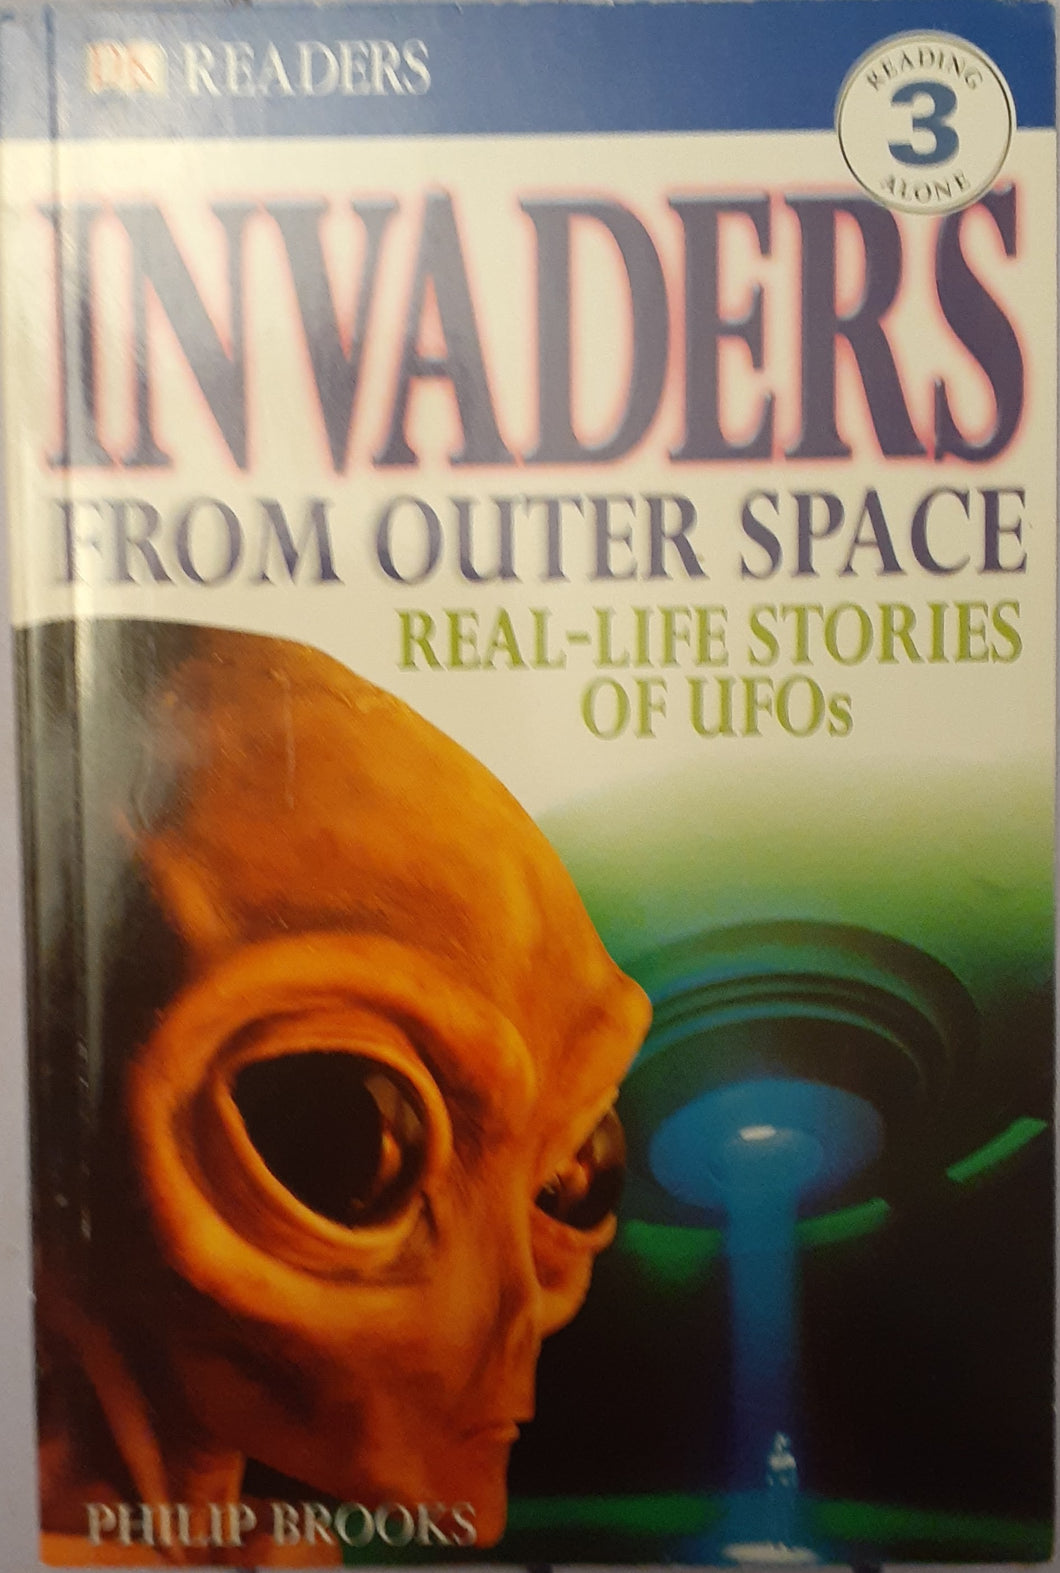 Invaders from Outer Space - Real Life Stories of UFOs